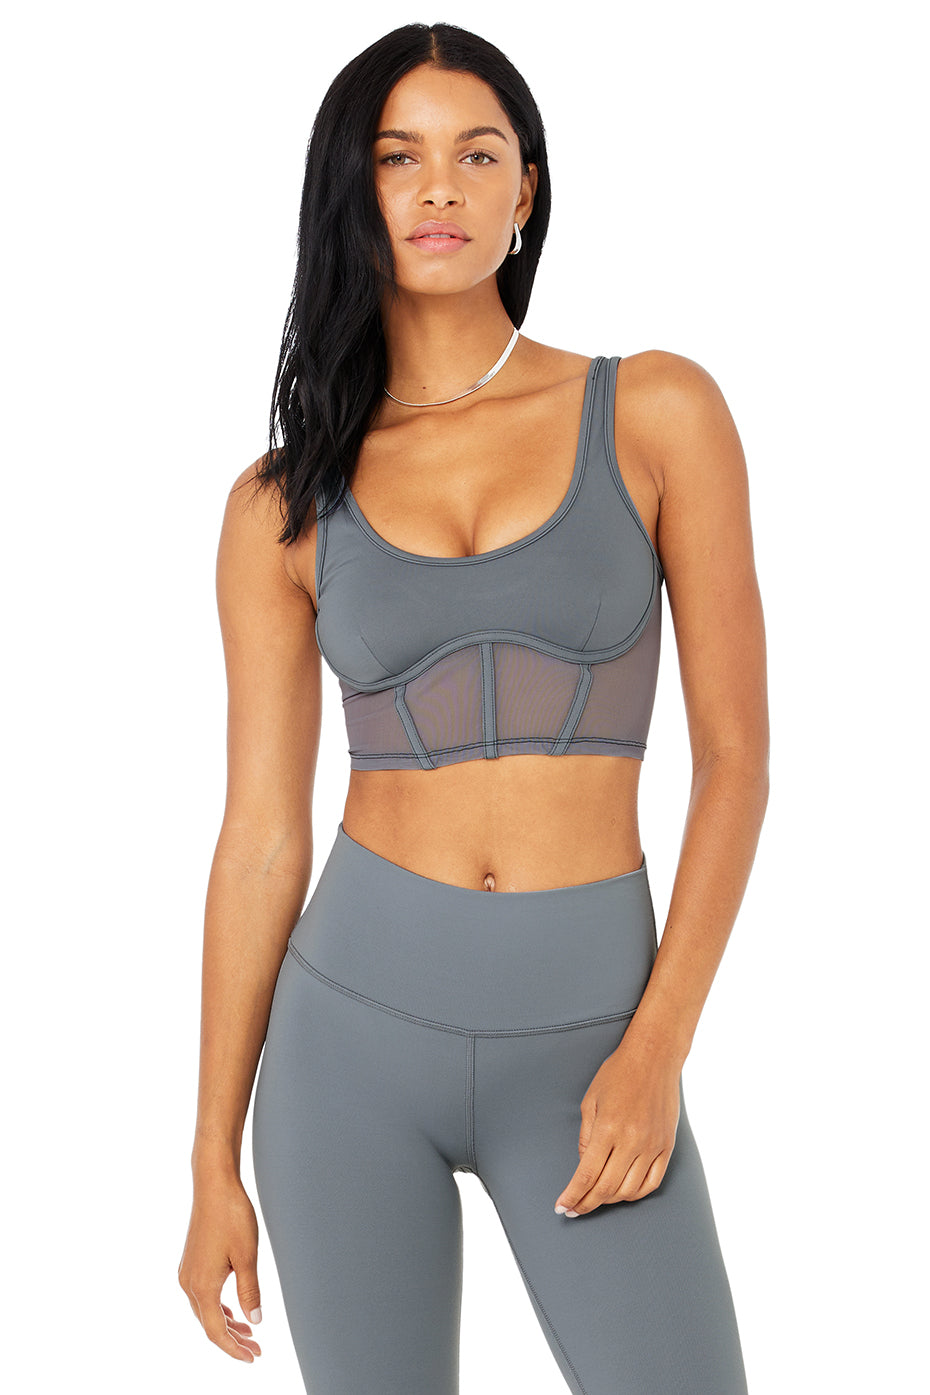 Airbrush Mesh Corset Tank Top in Steel Blue by Alo Yoga - Work